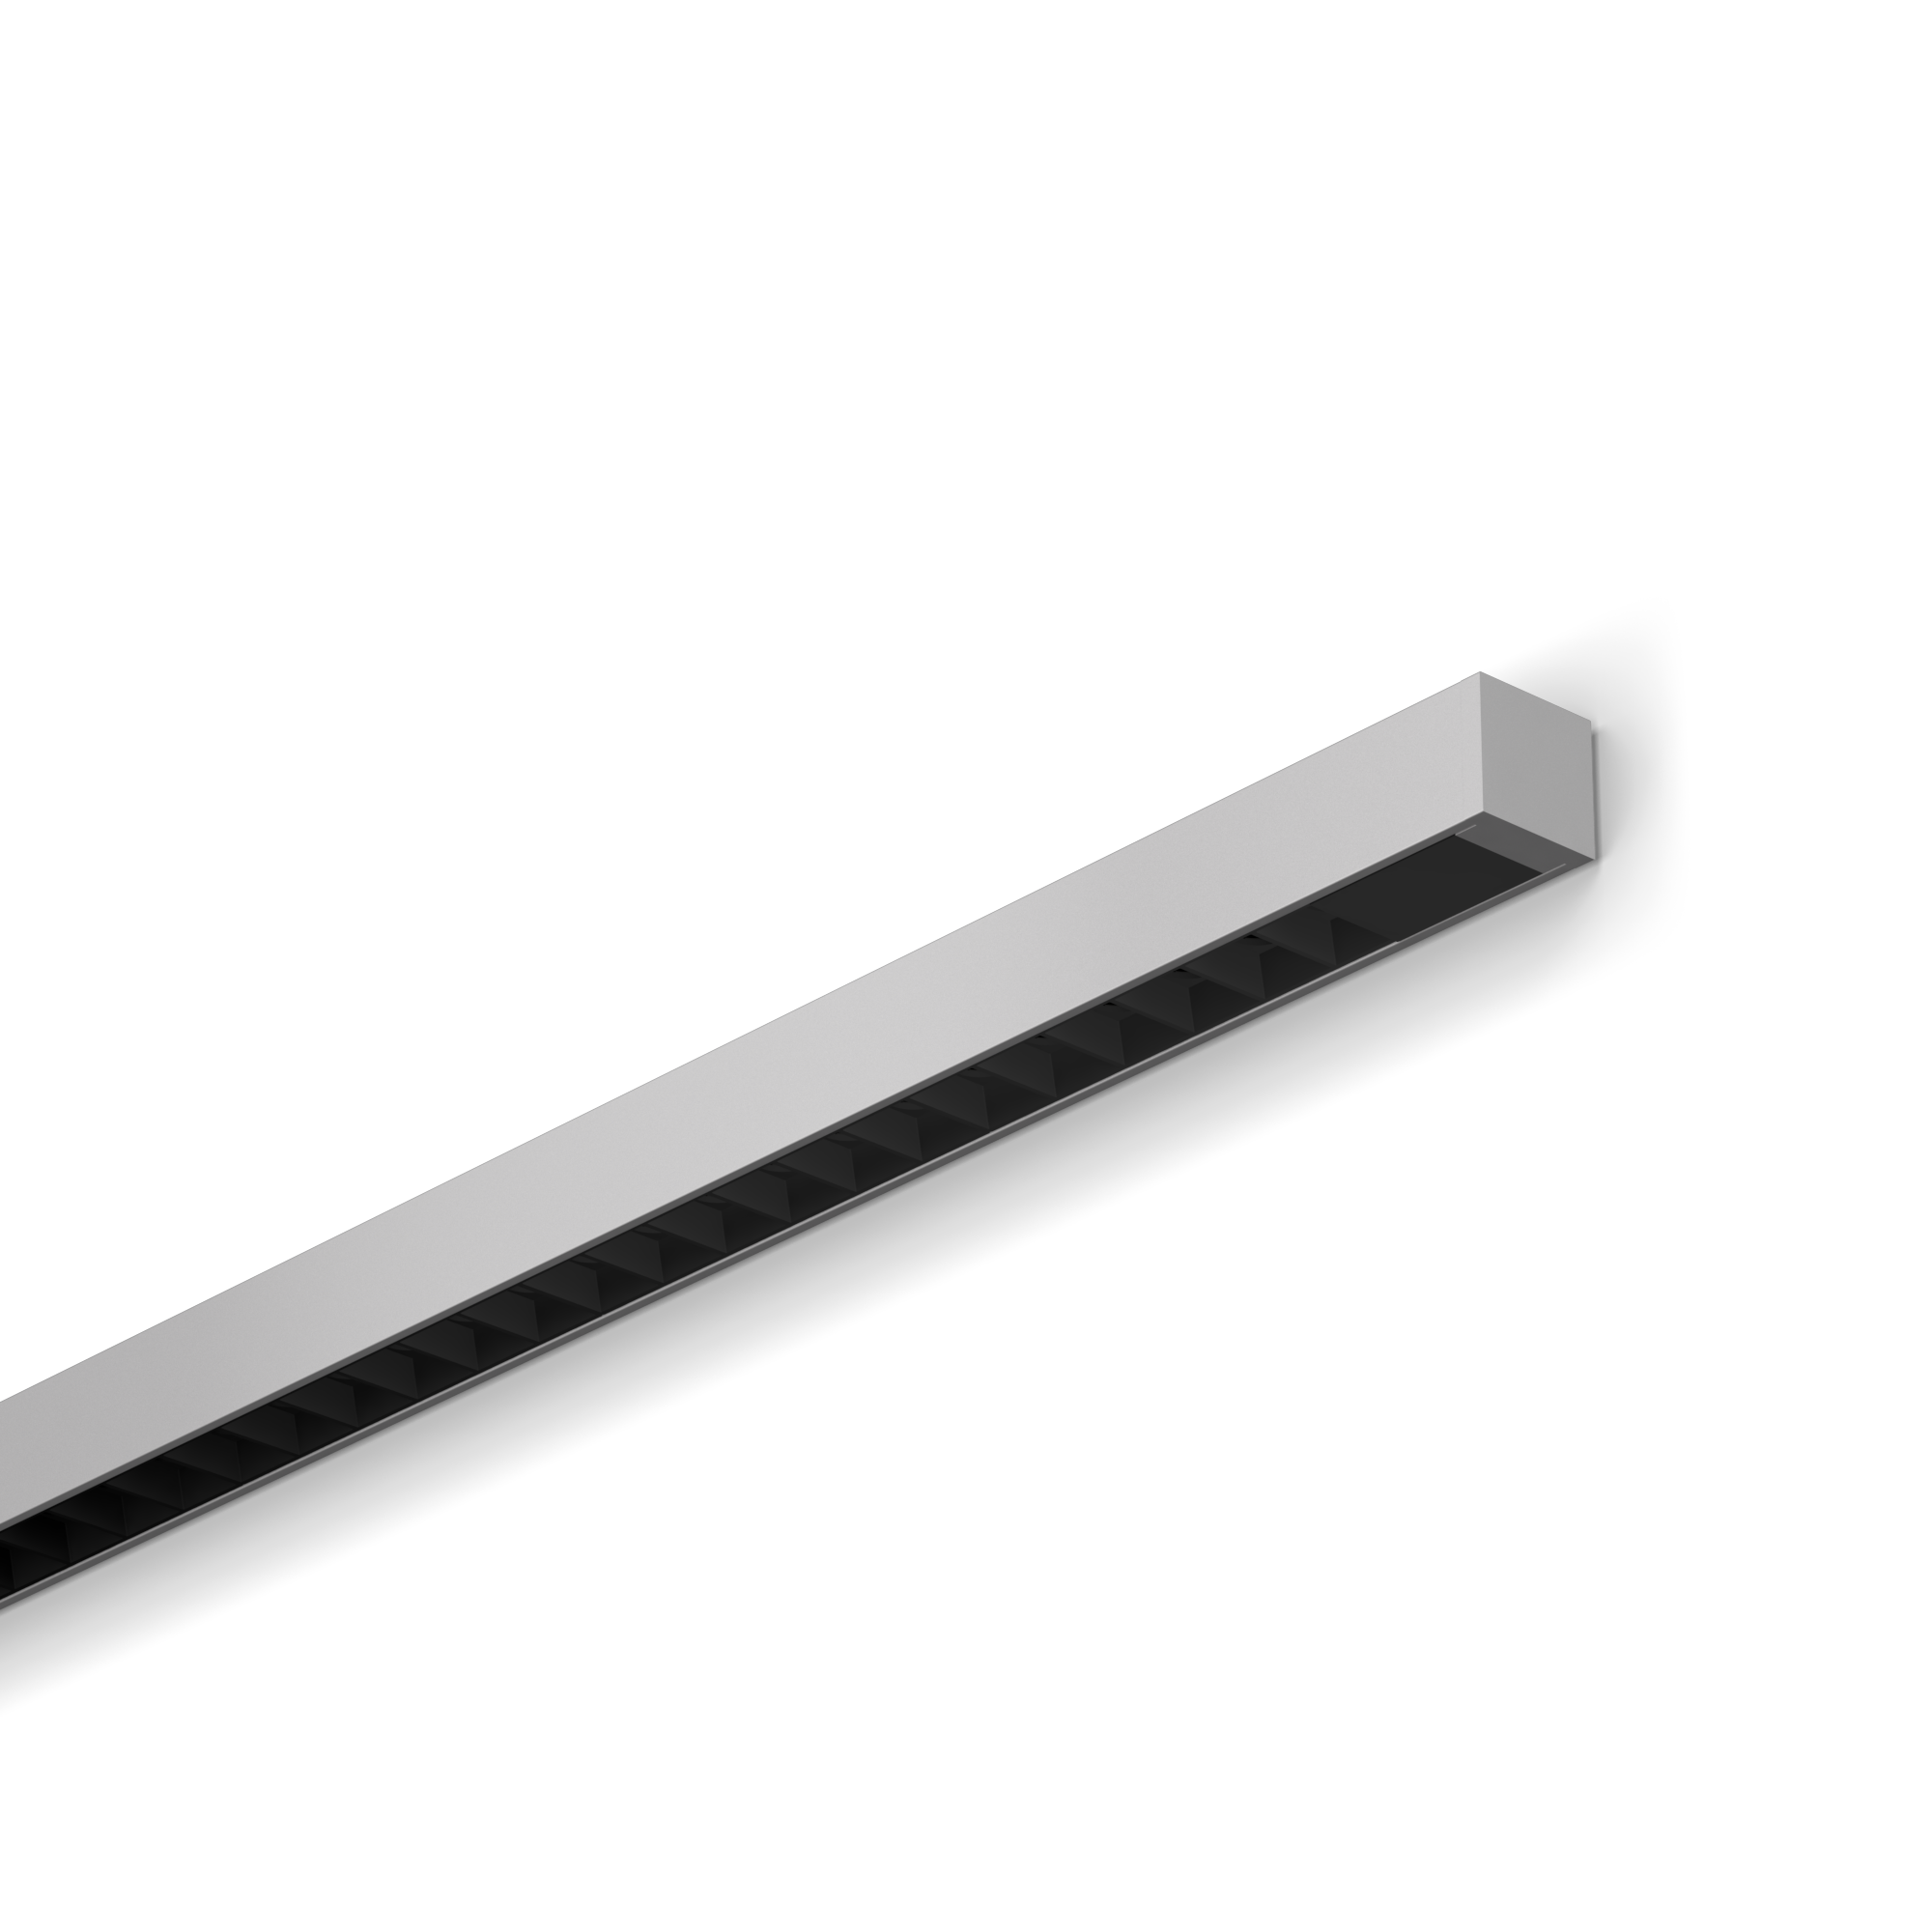 0.95” Ultra-Compact LED Linear with Nano Cavity Optics (NCO)
NANOSquare is 0.95” square, bringing SmartBeam® capabilities to a graphic scale that complements architectural space. NANOSquare features a remote driver to remove visual bulk. Optional Individual lenses and parabolic reflectors are located below each LED using Nano-Cavity Optics (NCO). For greater comfort, the regulated beam lowers glare and adjusts light output. These concentrated distributions are ideal for a wide range of taskspecific requirements. At cut-off, NCO has a softer appearance, a larger beam spread, and a gradual brightness transition.